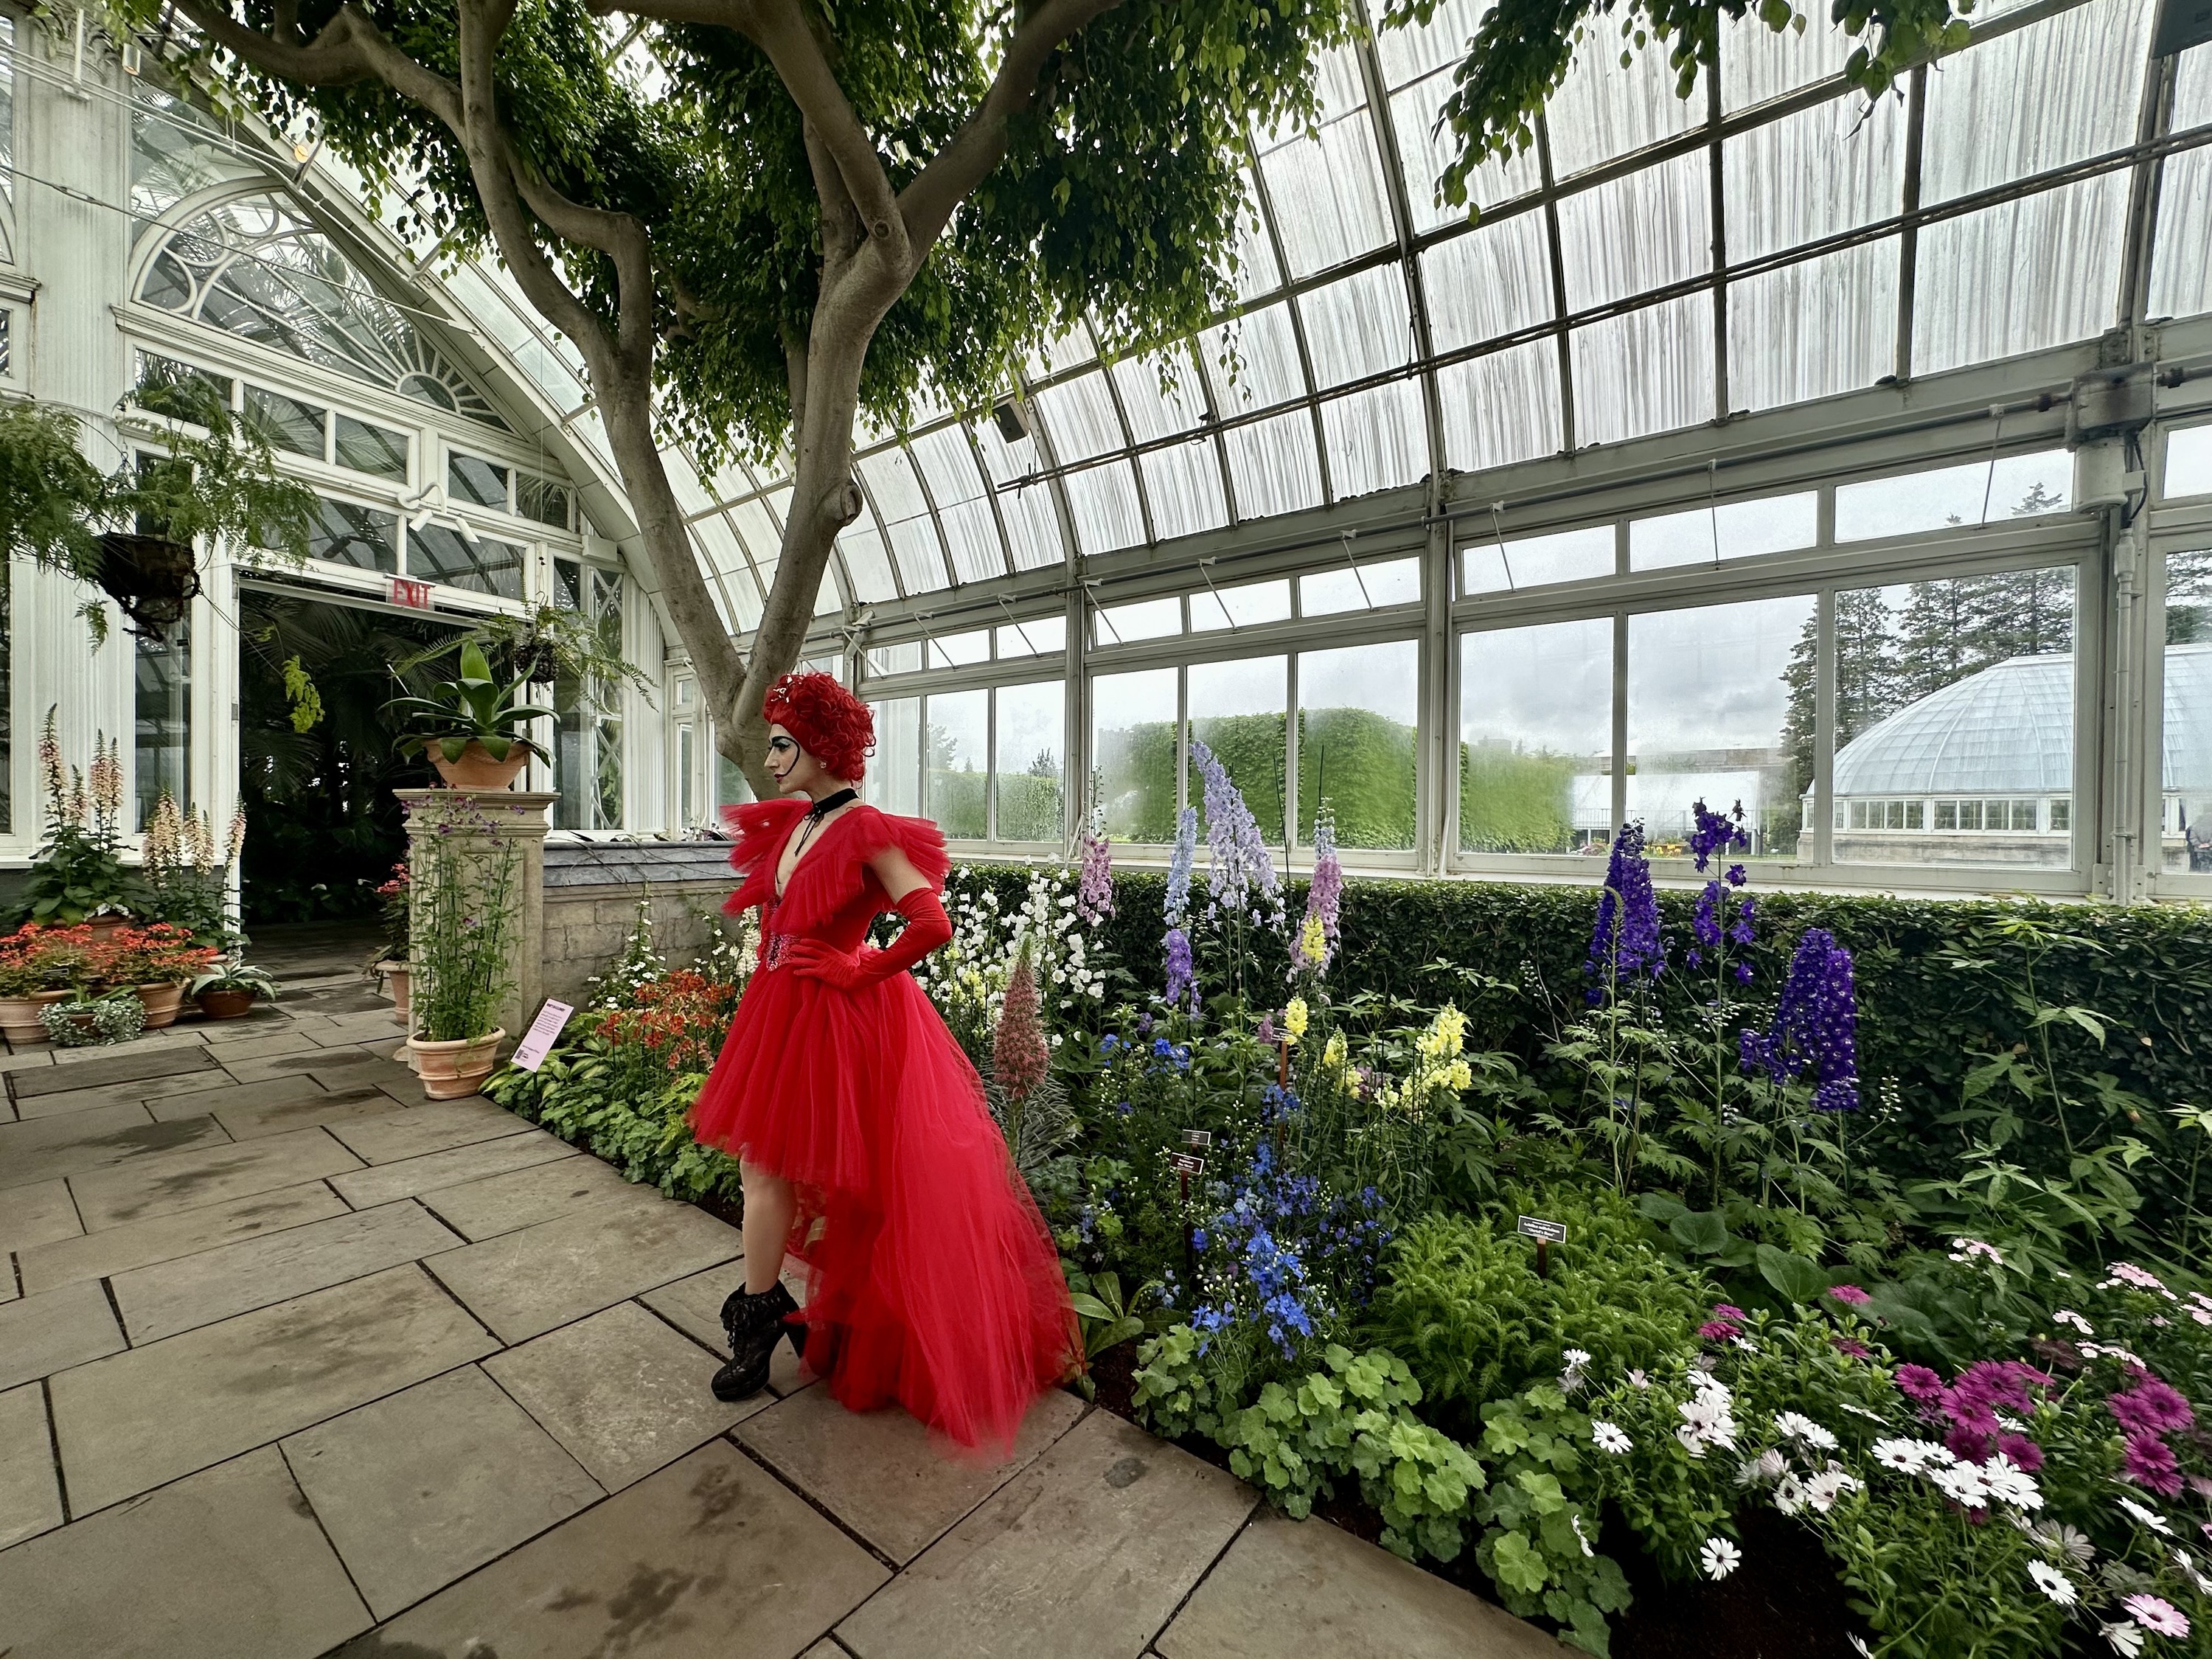 A woman dressed up the Red Queen at NYBG.